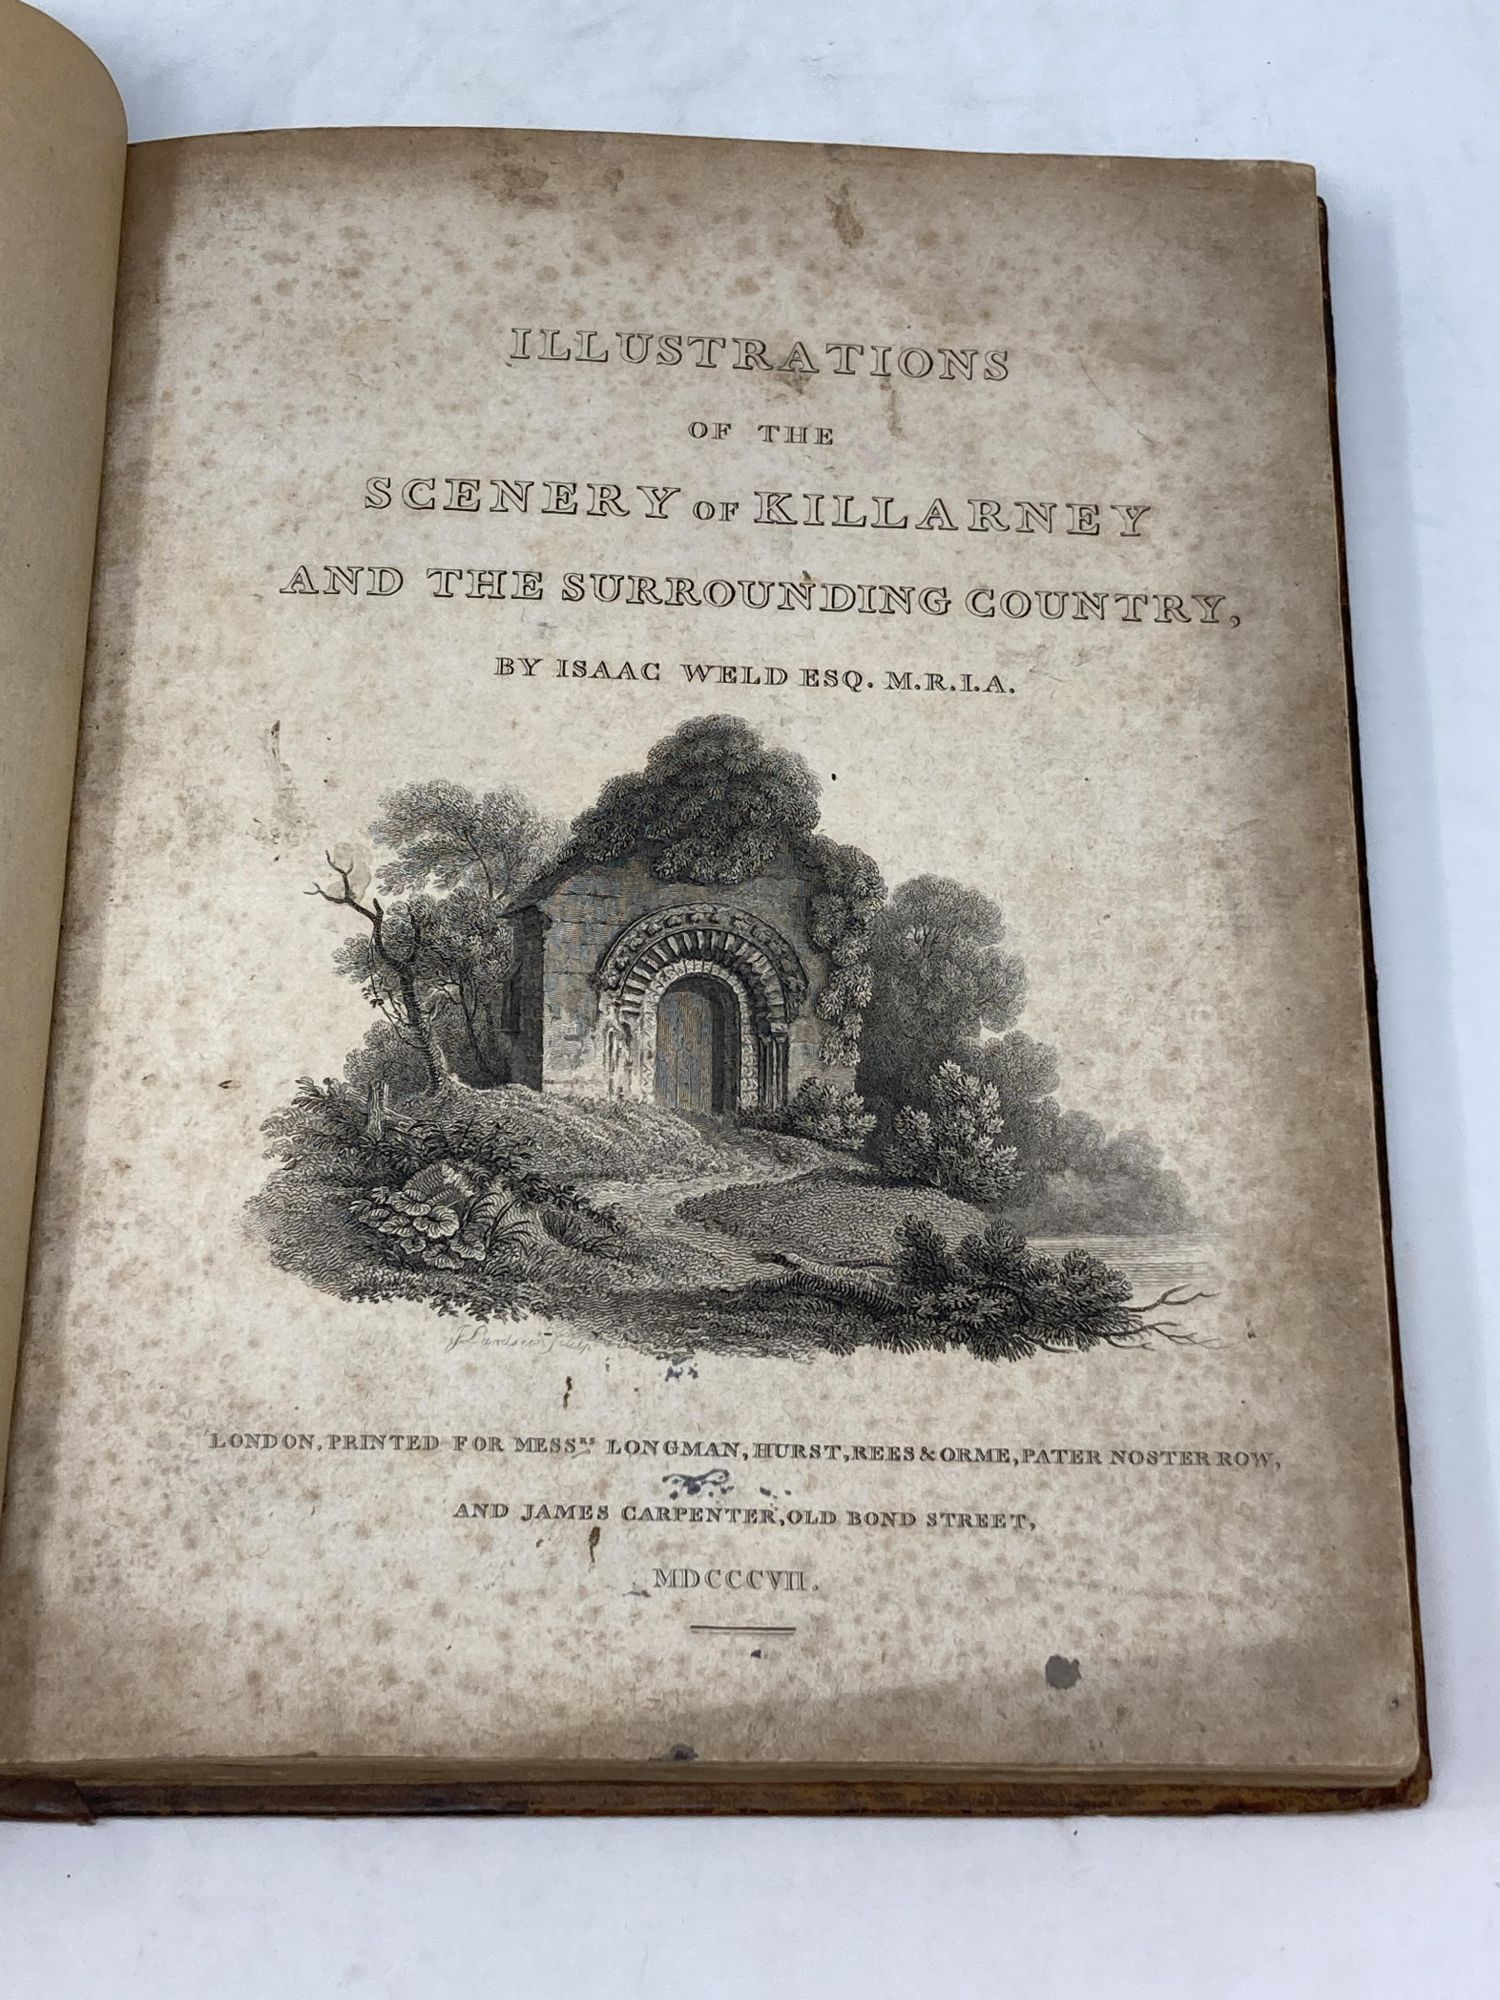 Weld, Isaac - Illustrations of the Scenery of Killarney and the Surrounding Country